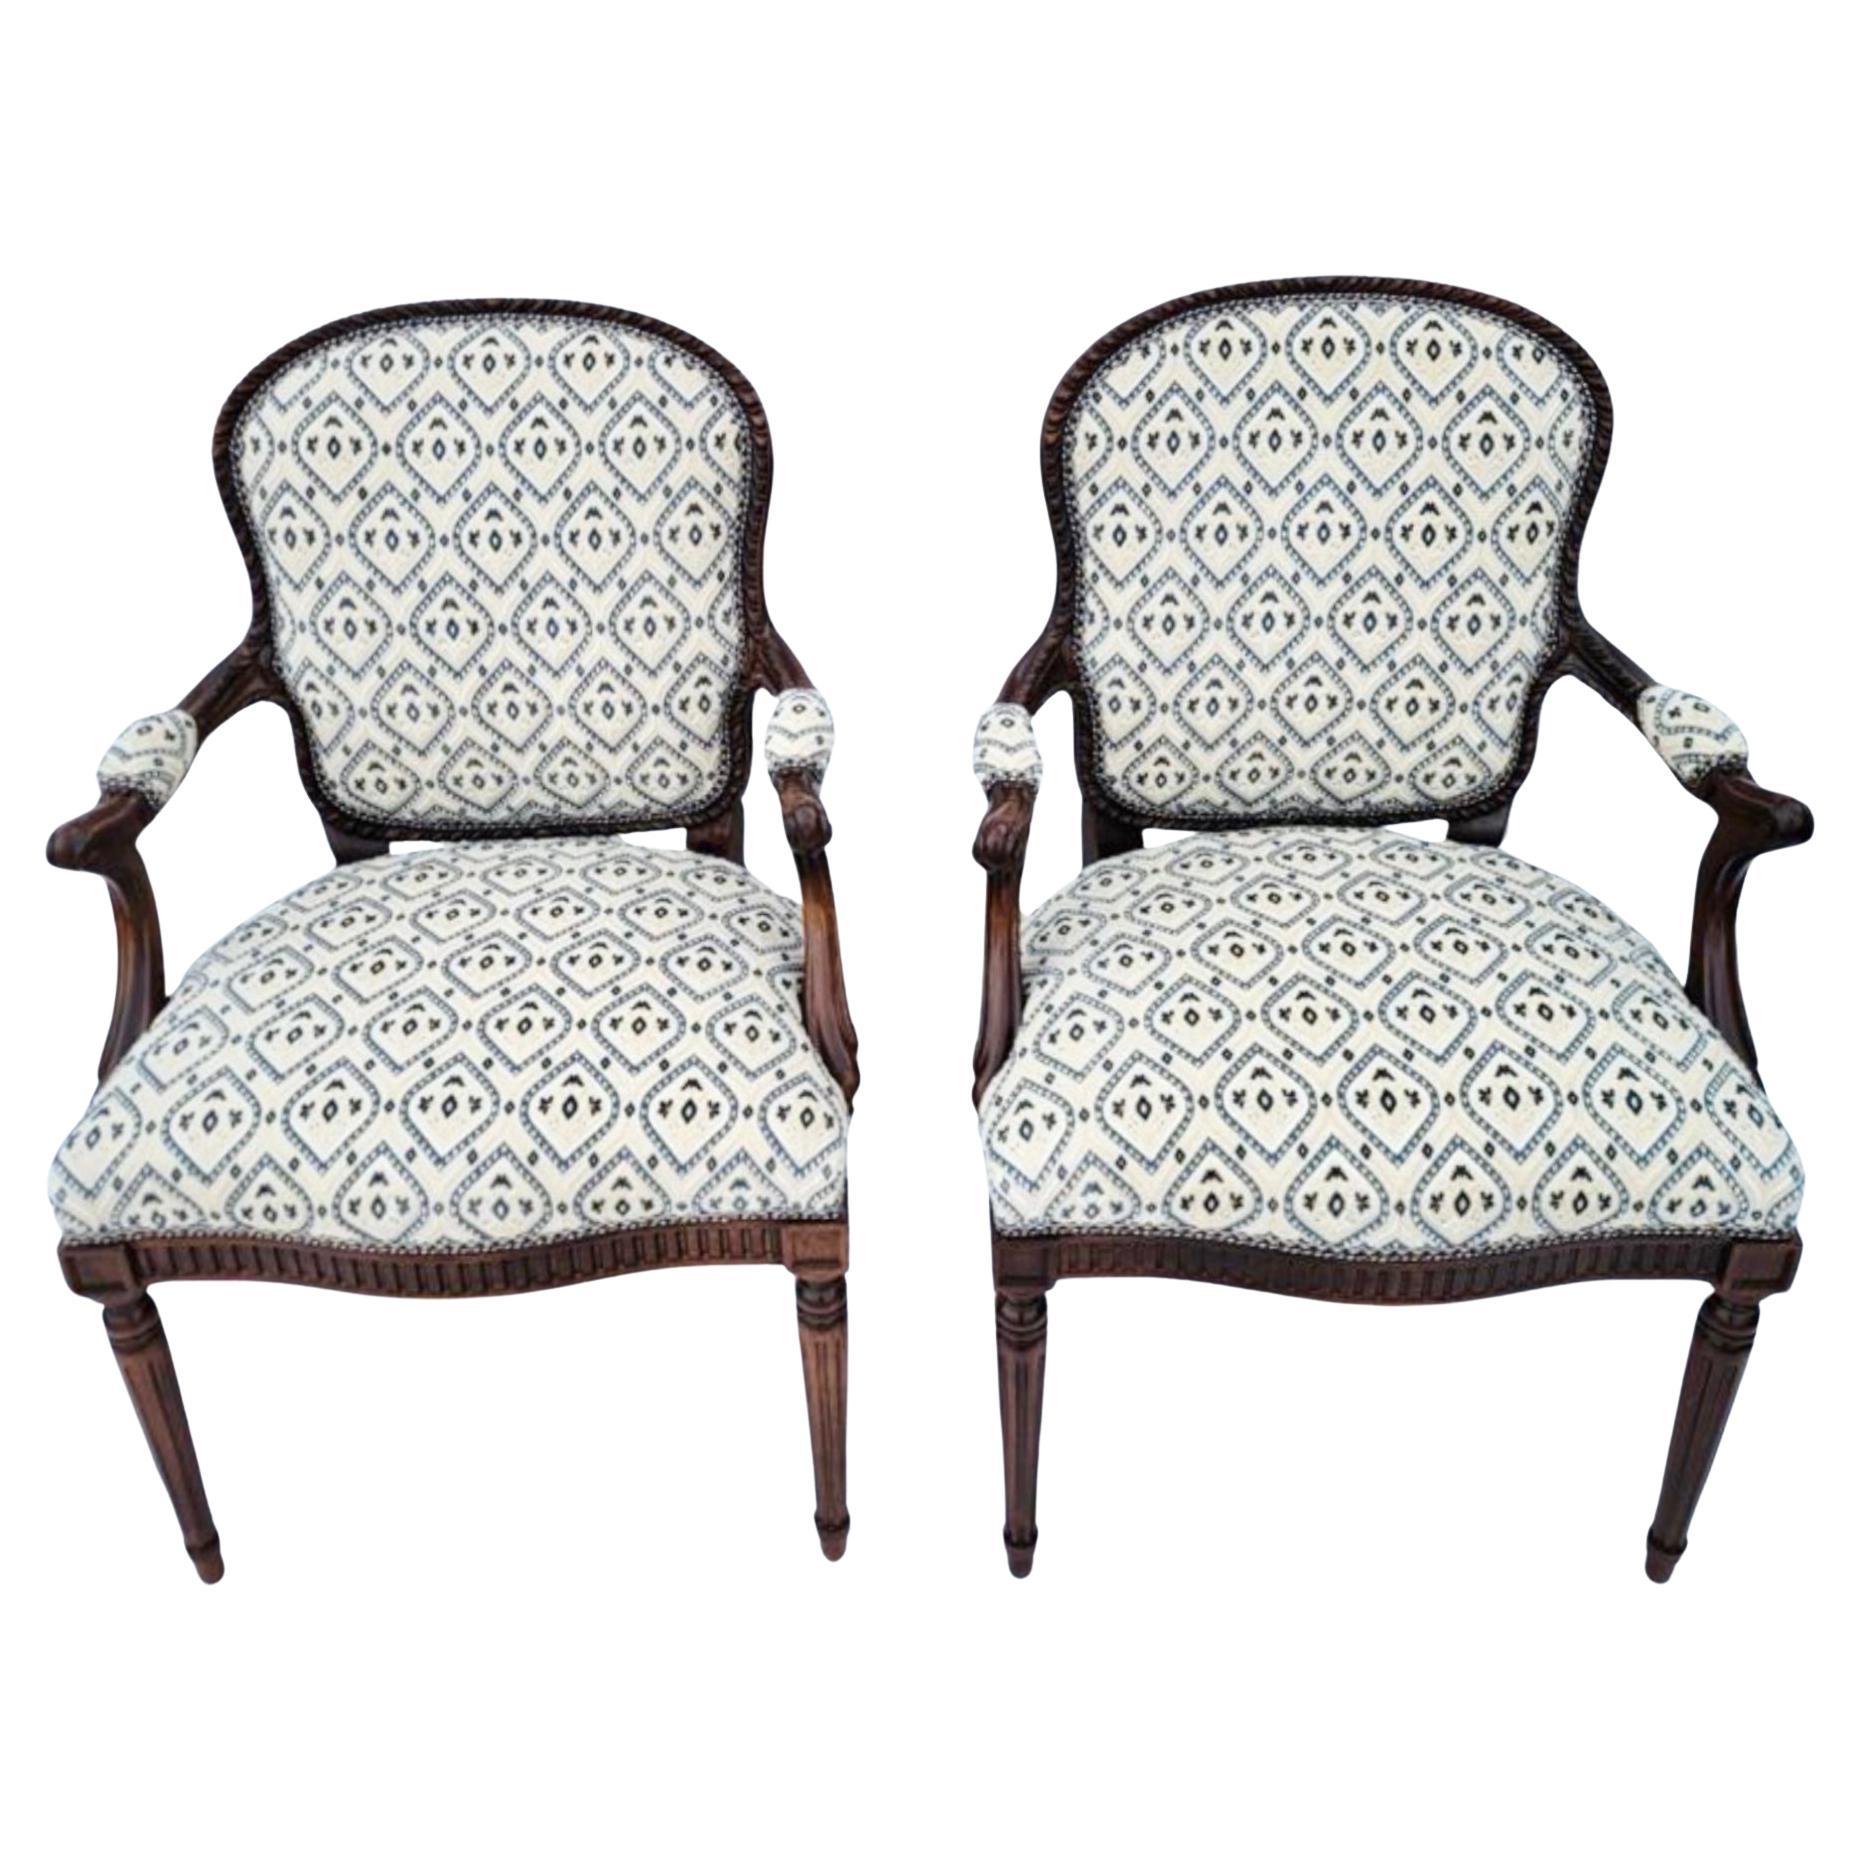 Pair of Antique Louis XV Style Carved Fauteuil Arm Chairs For Sale